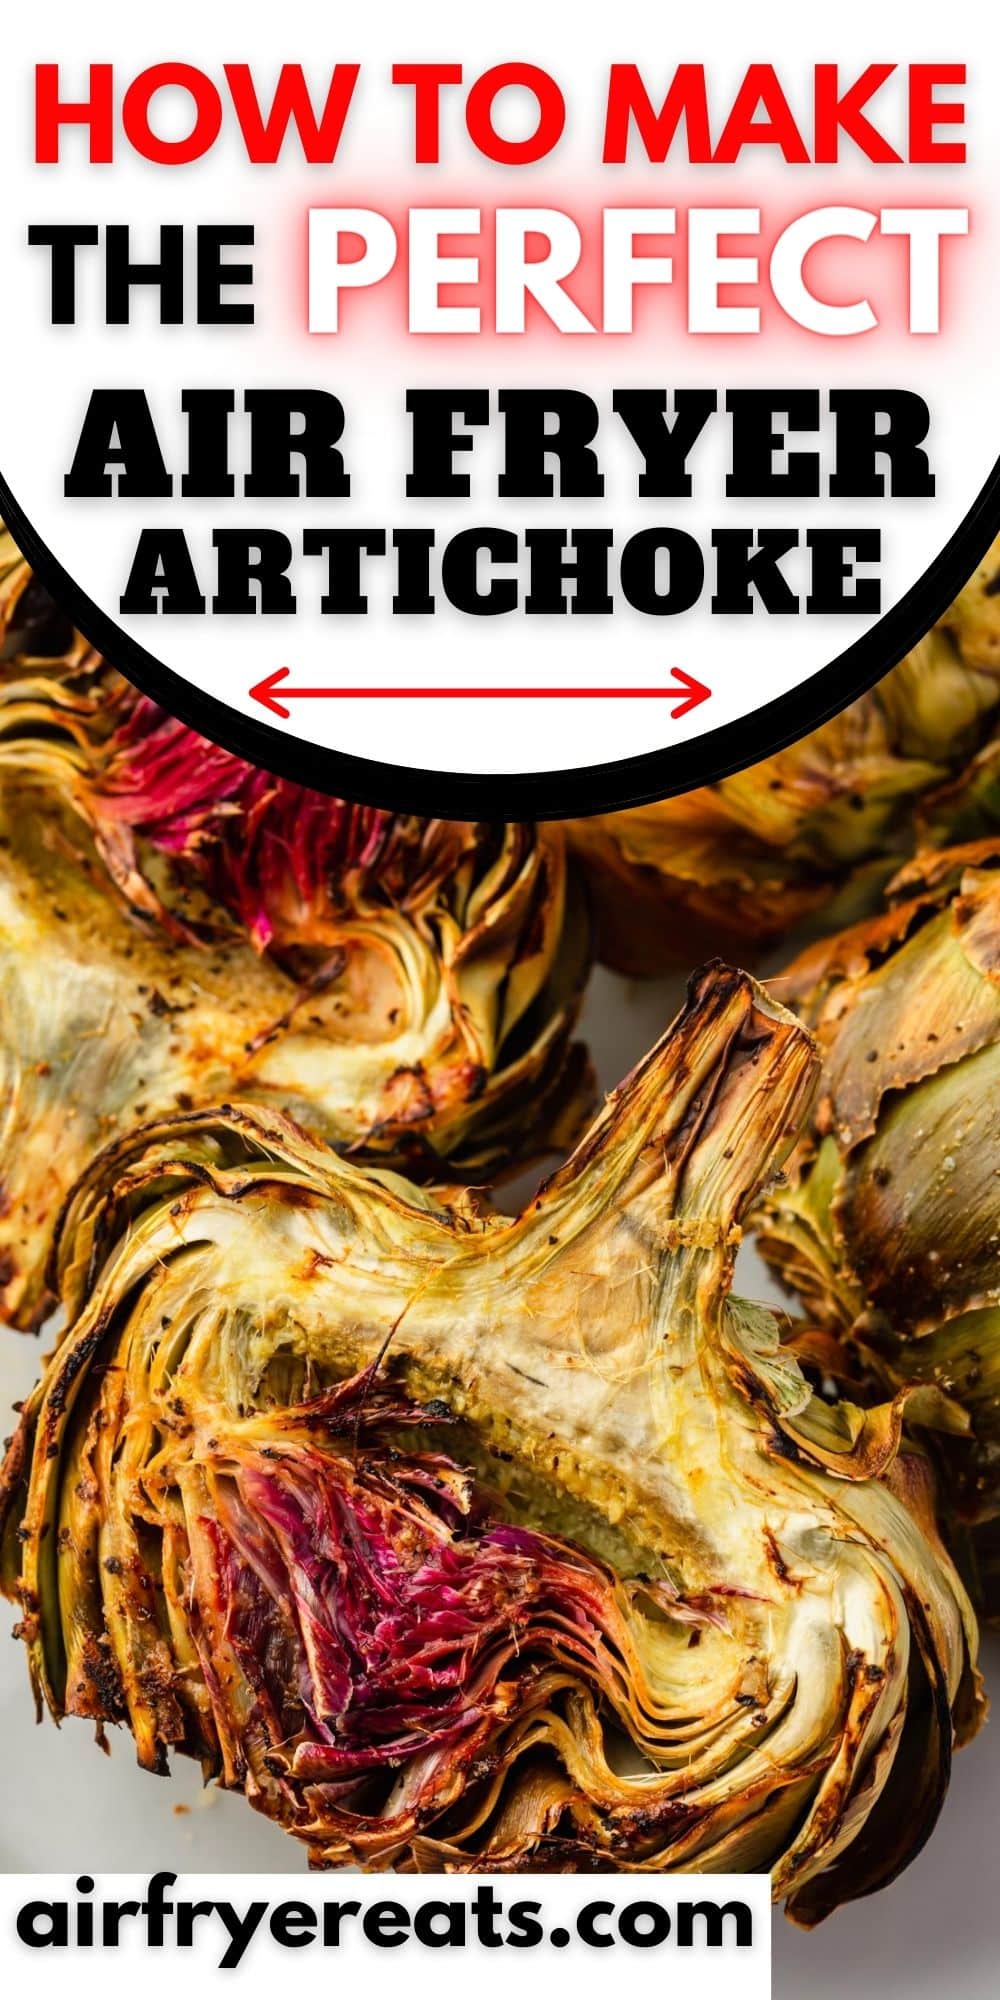 a roasted artichoke. Text at top of image says "how to make the perfect air fryer artichokes" via @vegetarianmamma